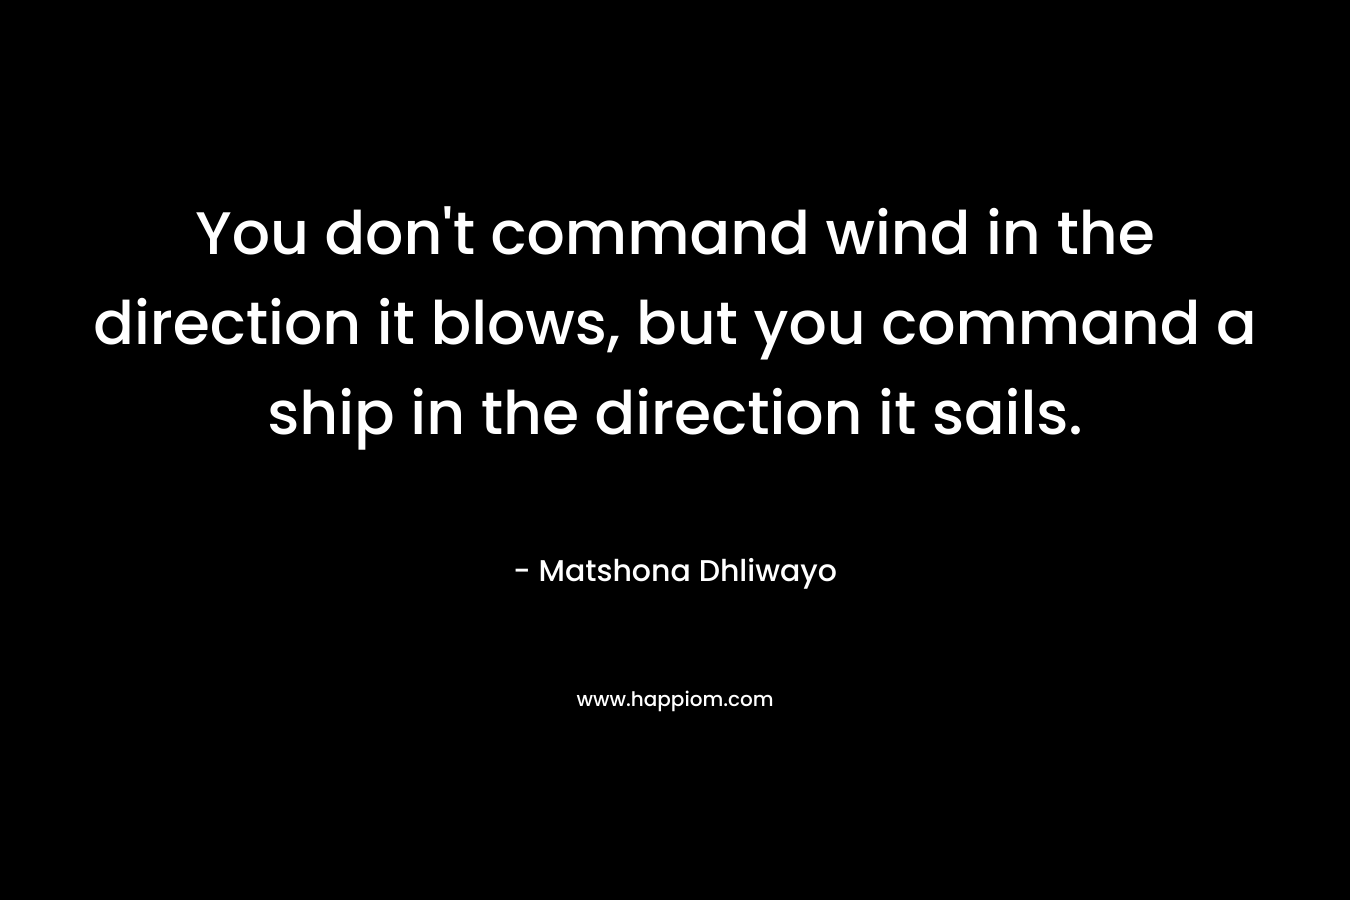 You don't command wind in the direction it blows, but you command a ship in the direction it sails.